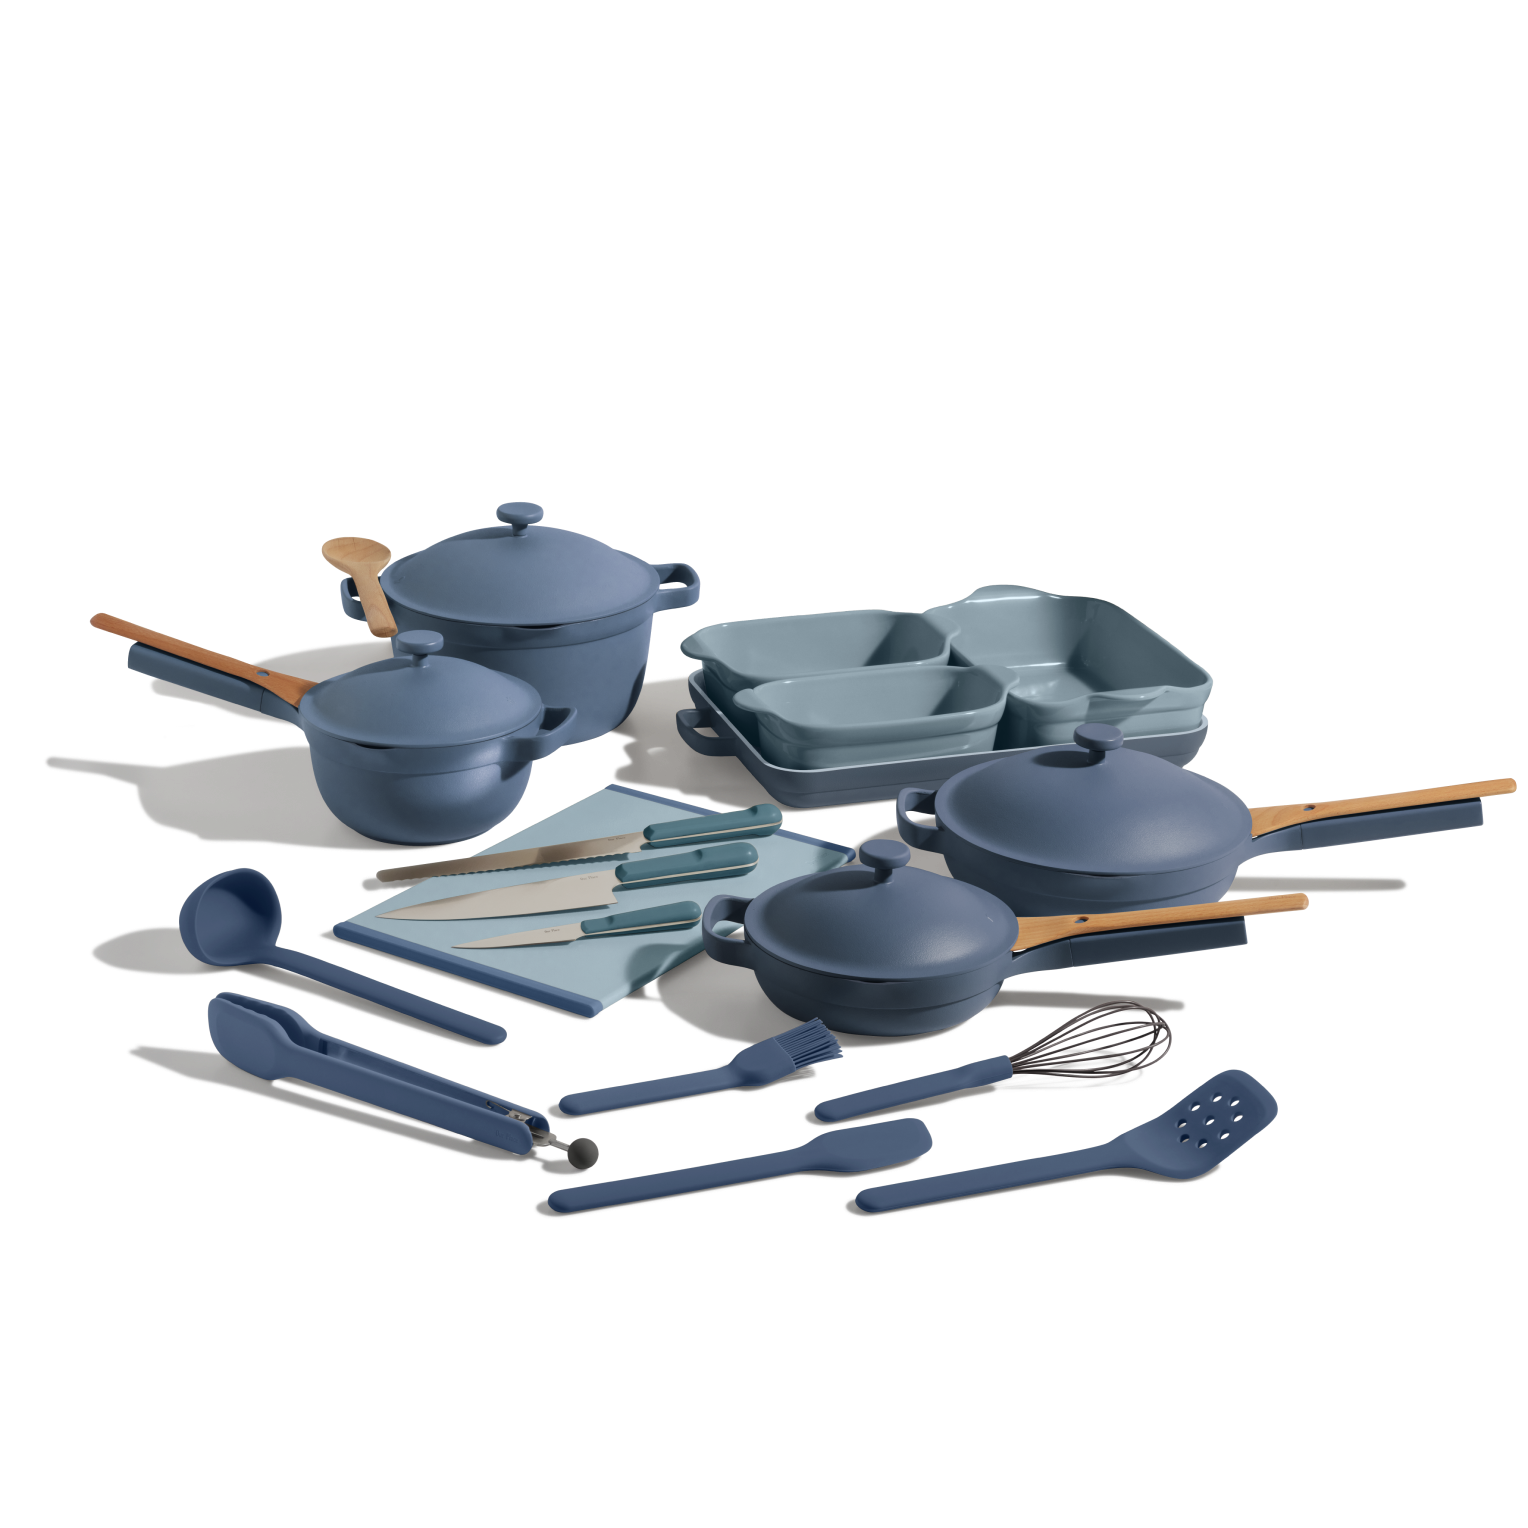 Our Place Ovenware Set | 5-Piece Nonstick, Toxin-Free, Ceramic, Stoneware  Set with Oven Pan, Bakers, & Oven Mat | Space-Saving Nesting Design 